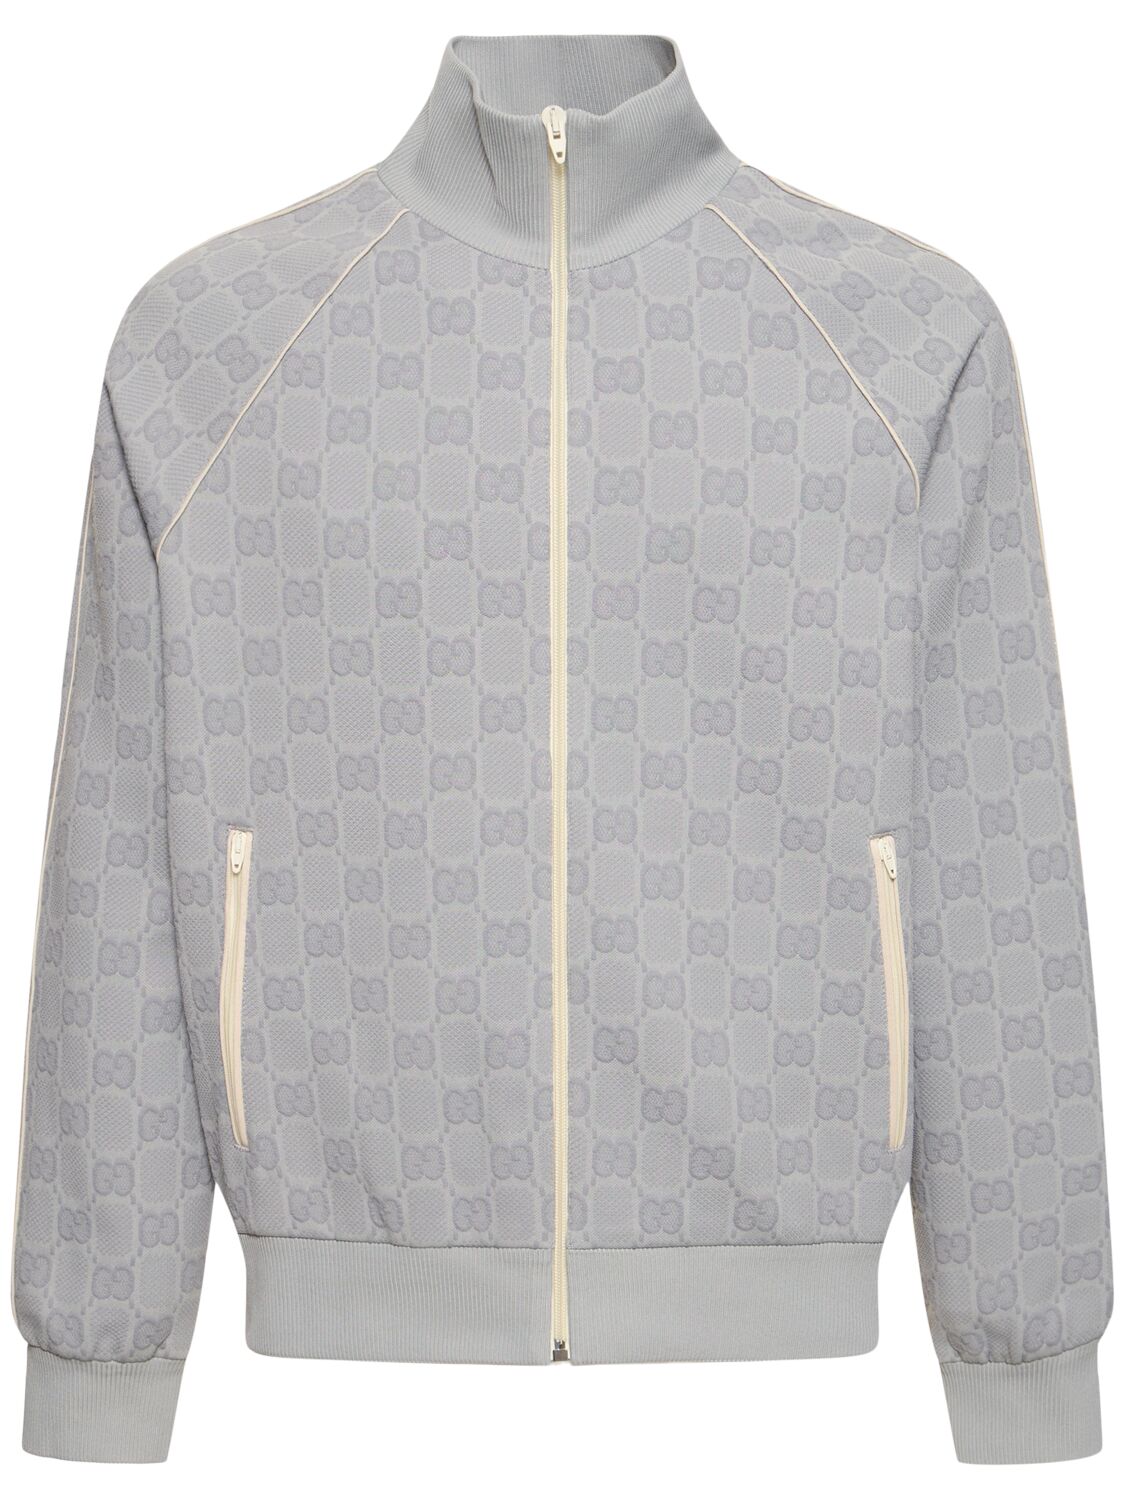 Gucci Gg Details Nylon Zip-up Jacket In Light Grey